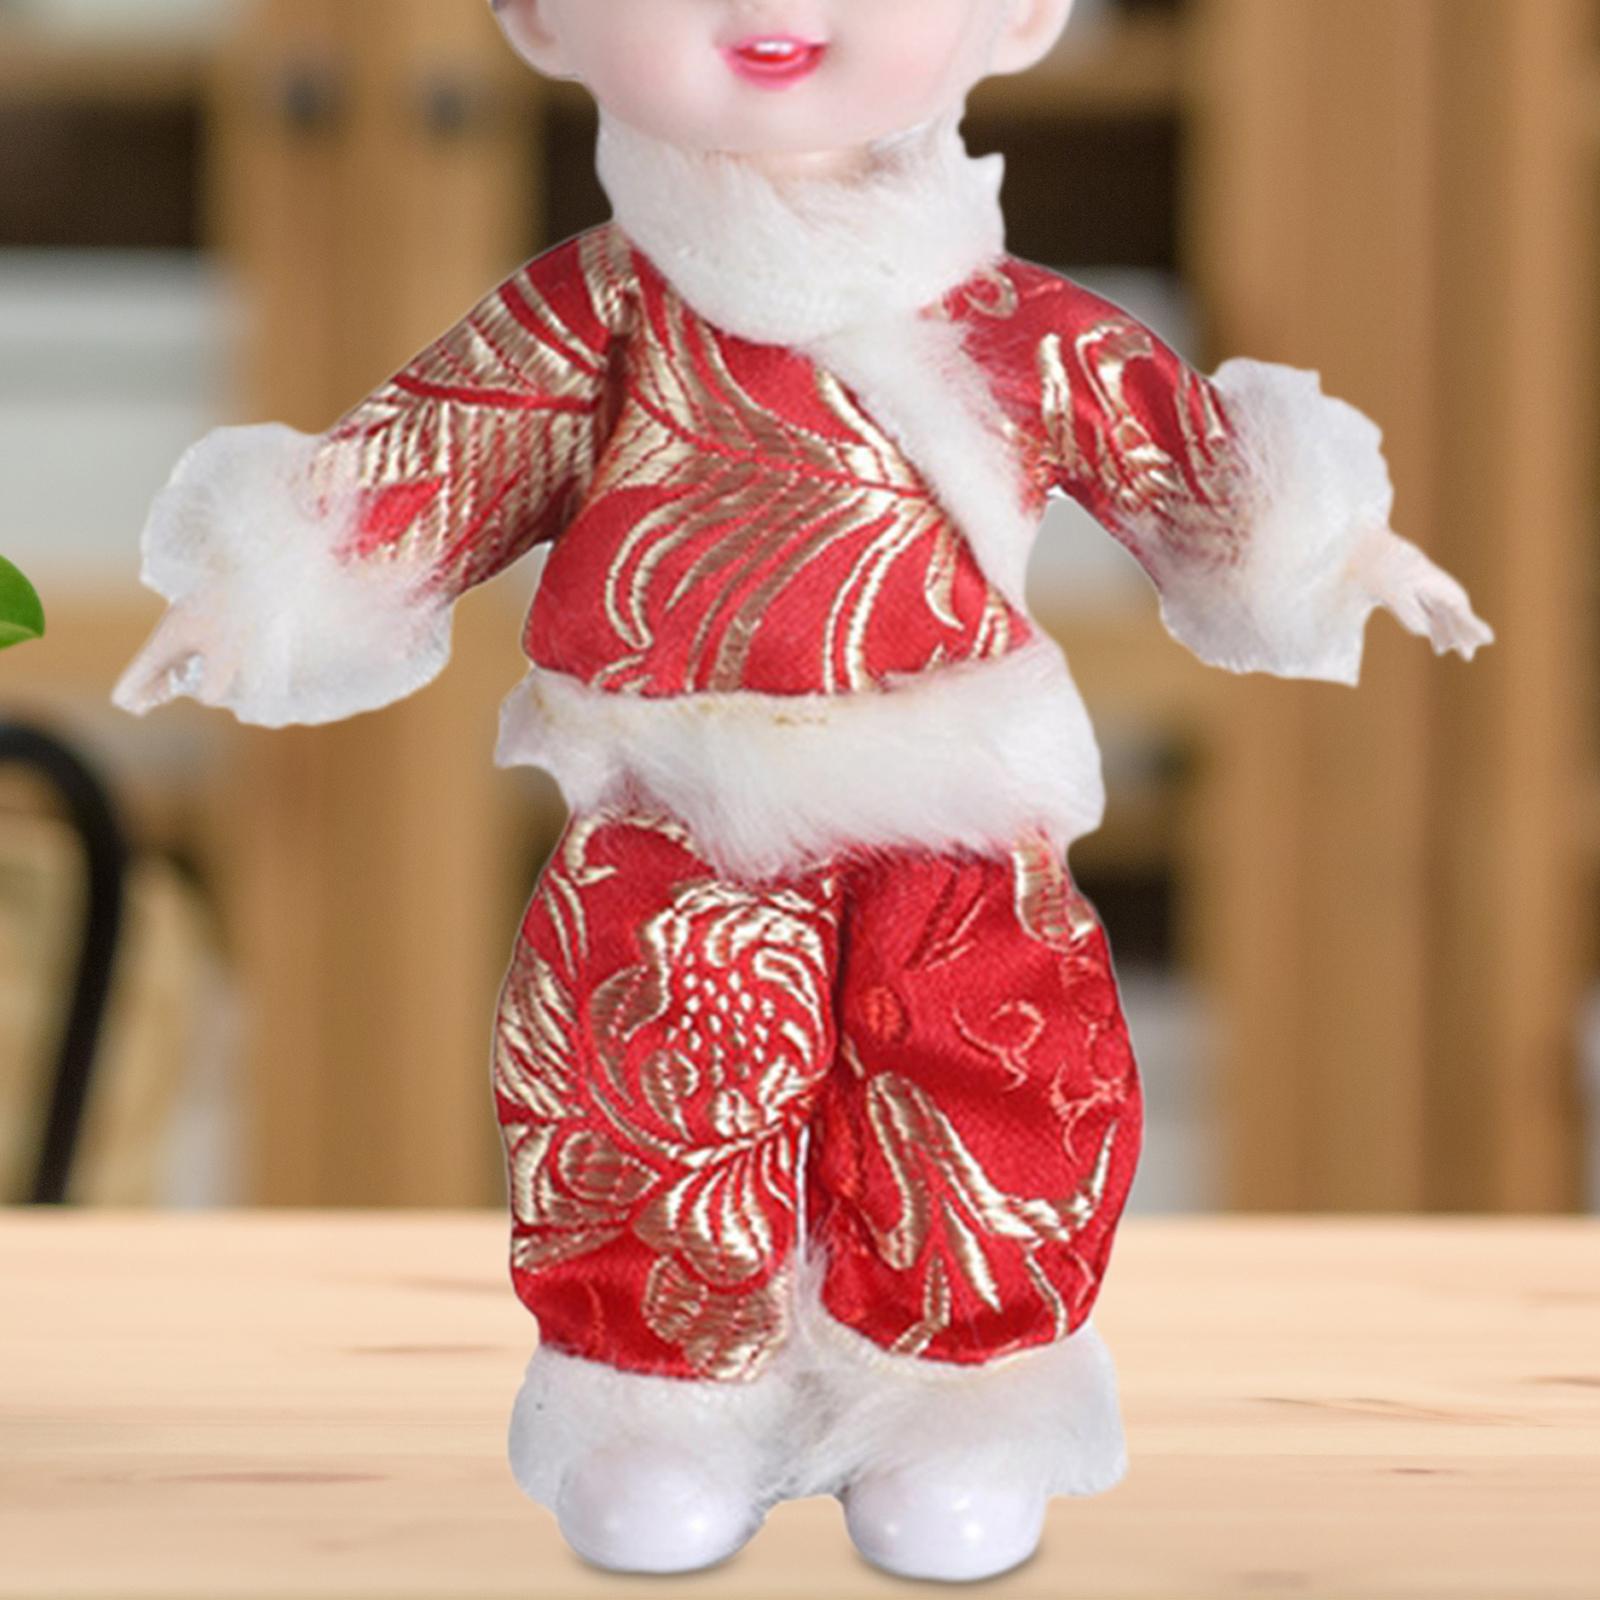 Handmade Doll Clothes Set Doll Dress Daily Wear Clothing for 17cm Doll Ob11 Doll Accessory Costume